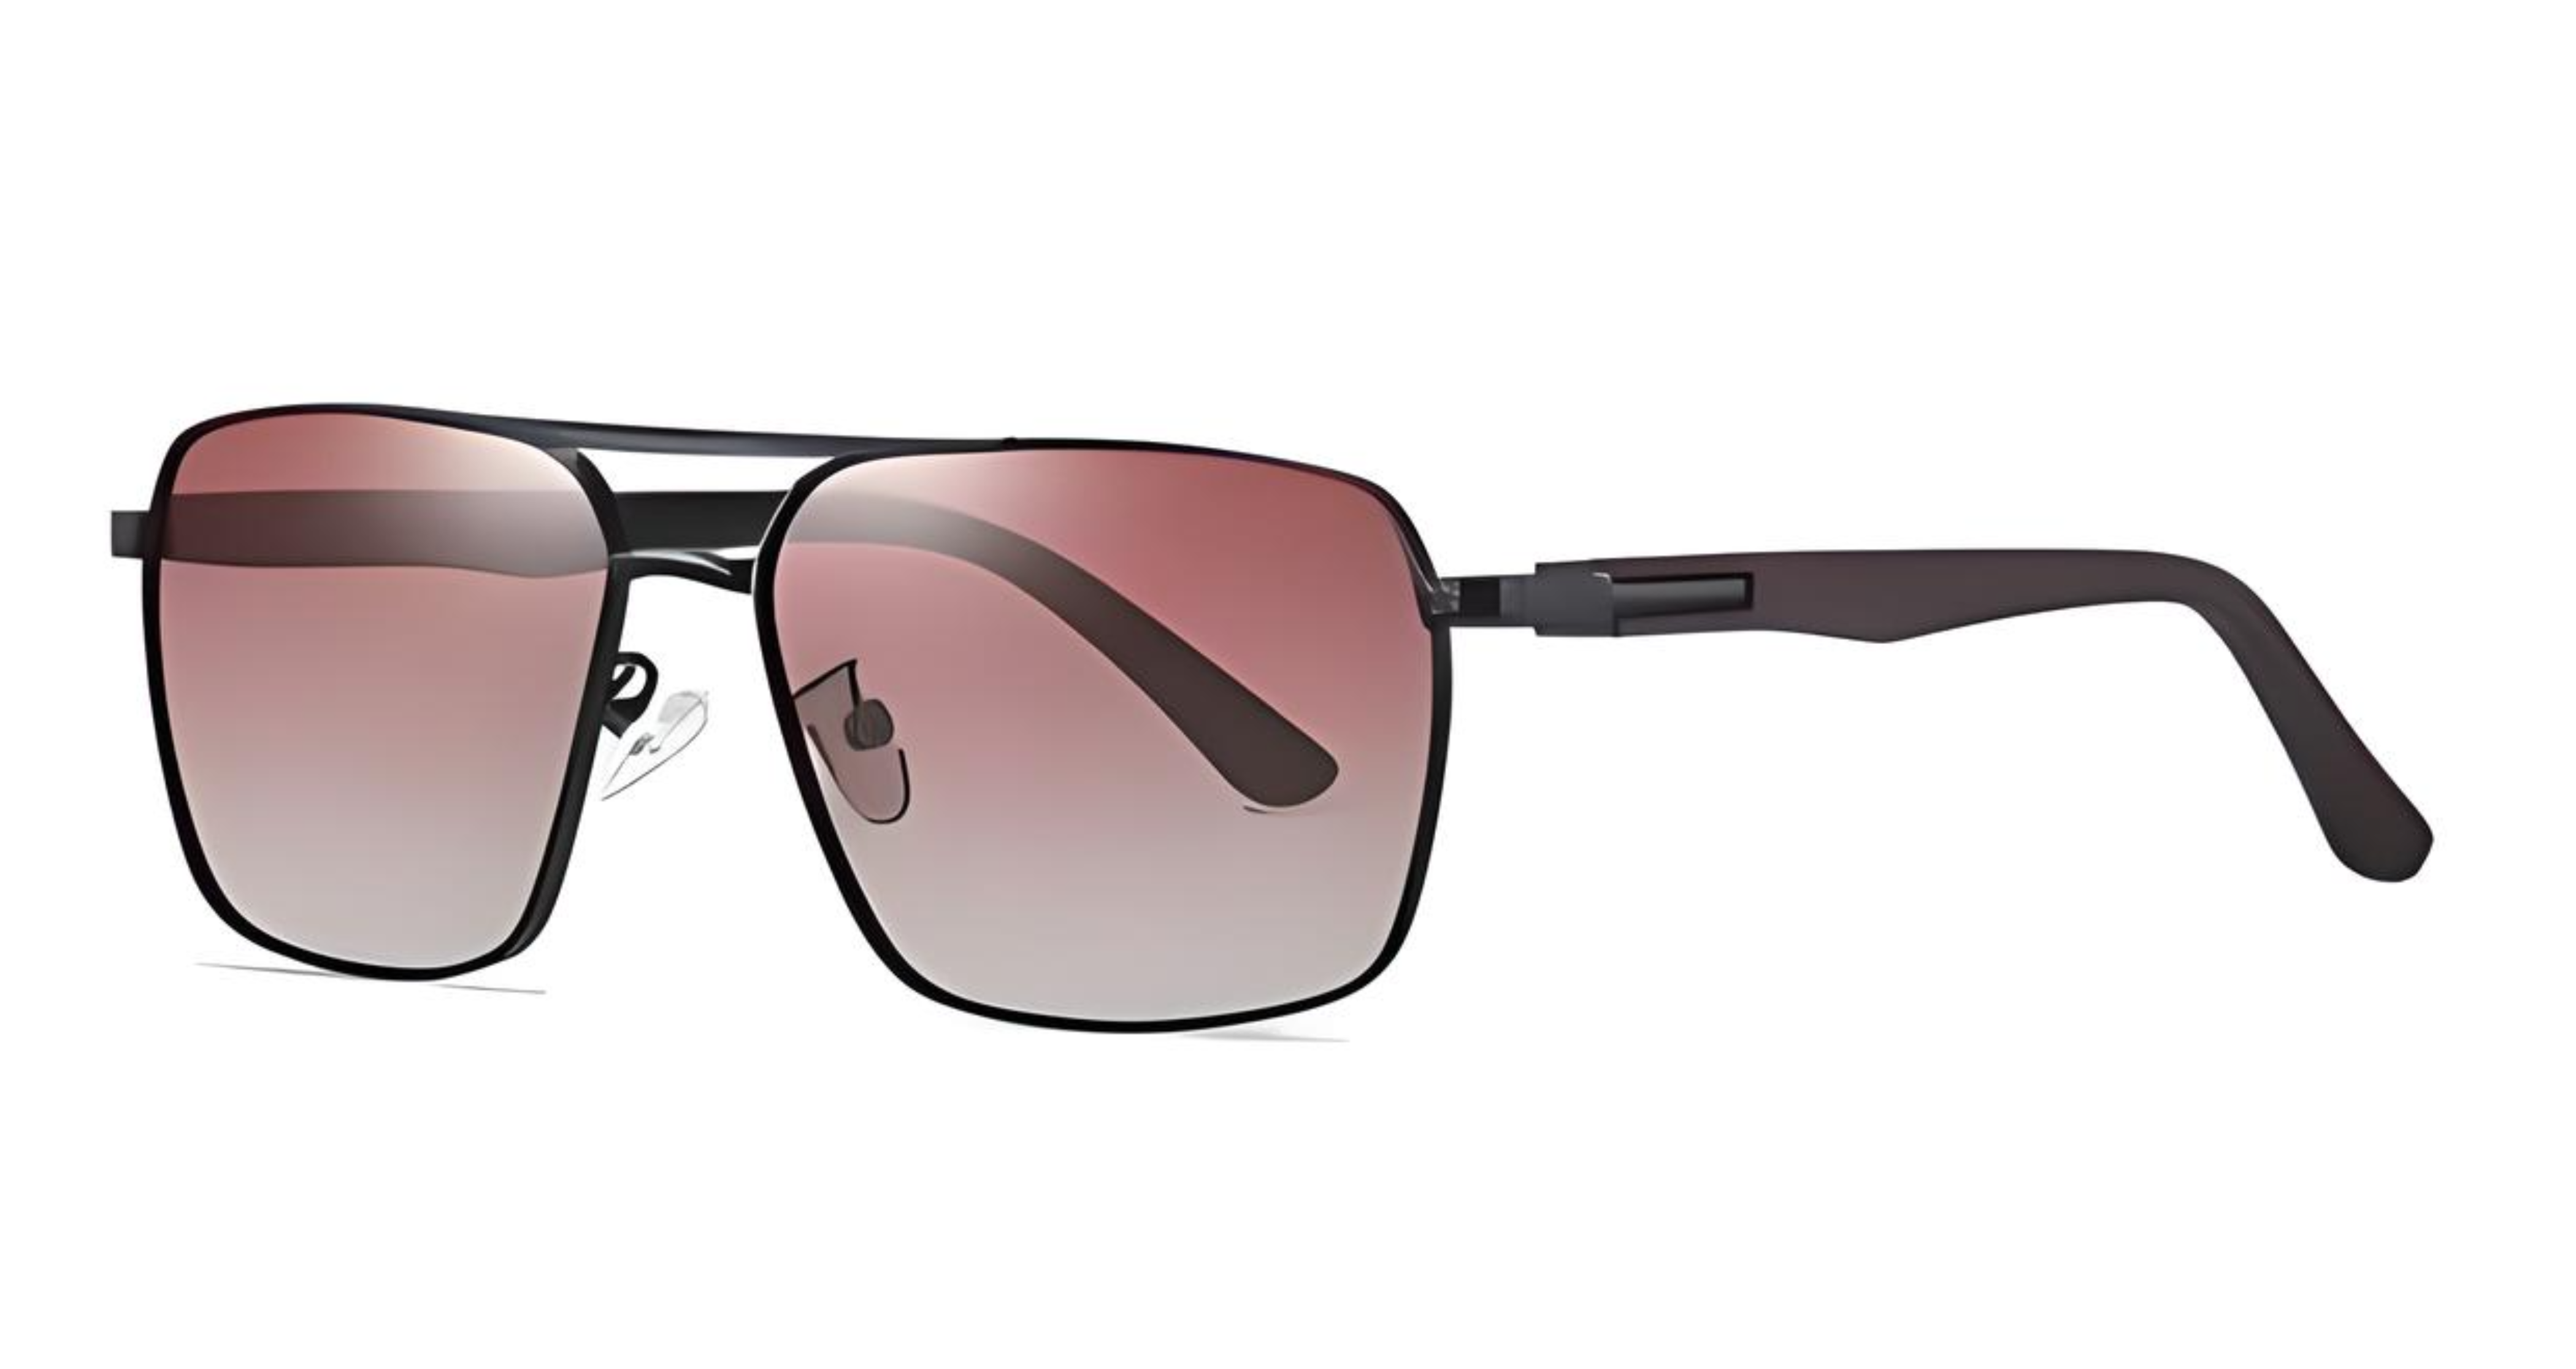 "Clearvue" Polarized